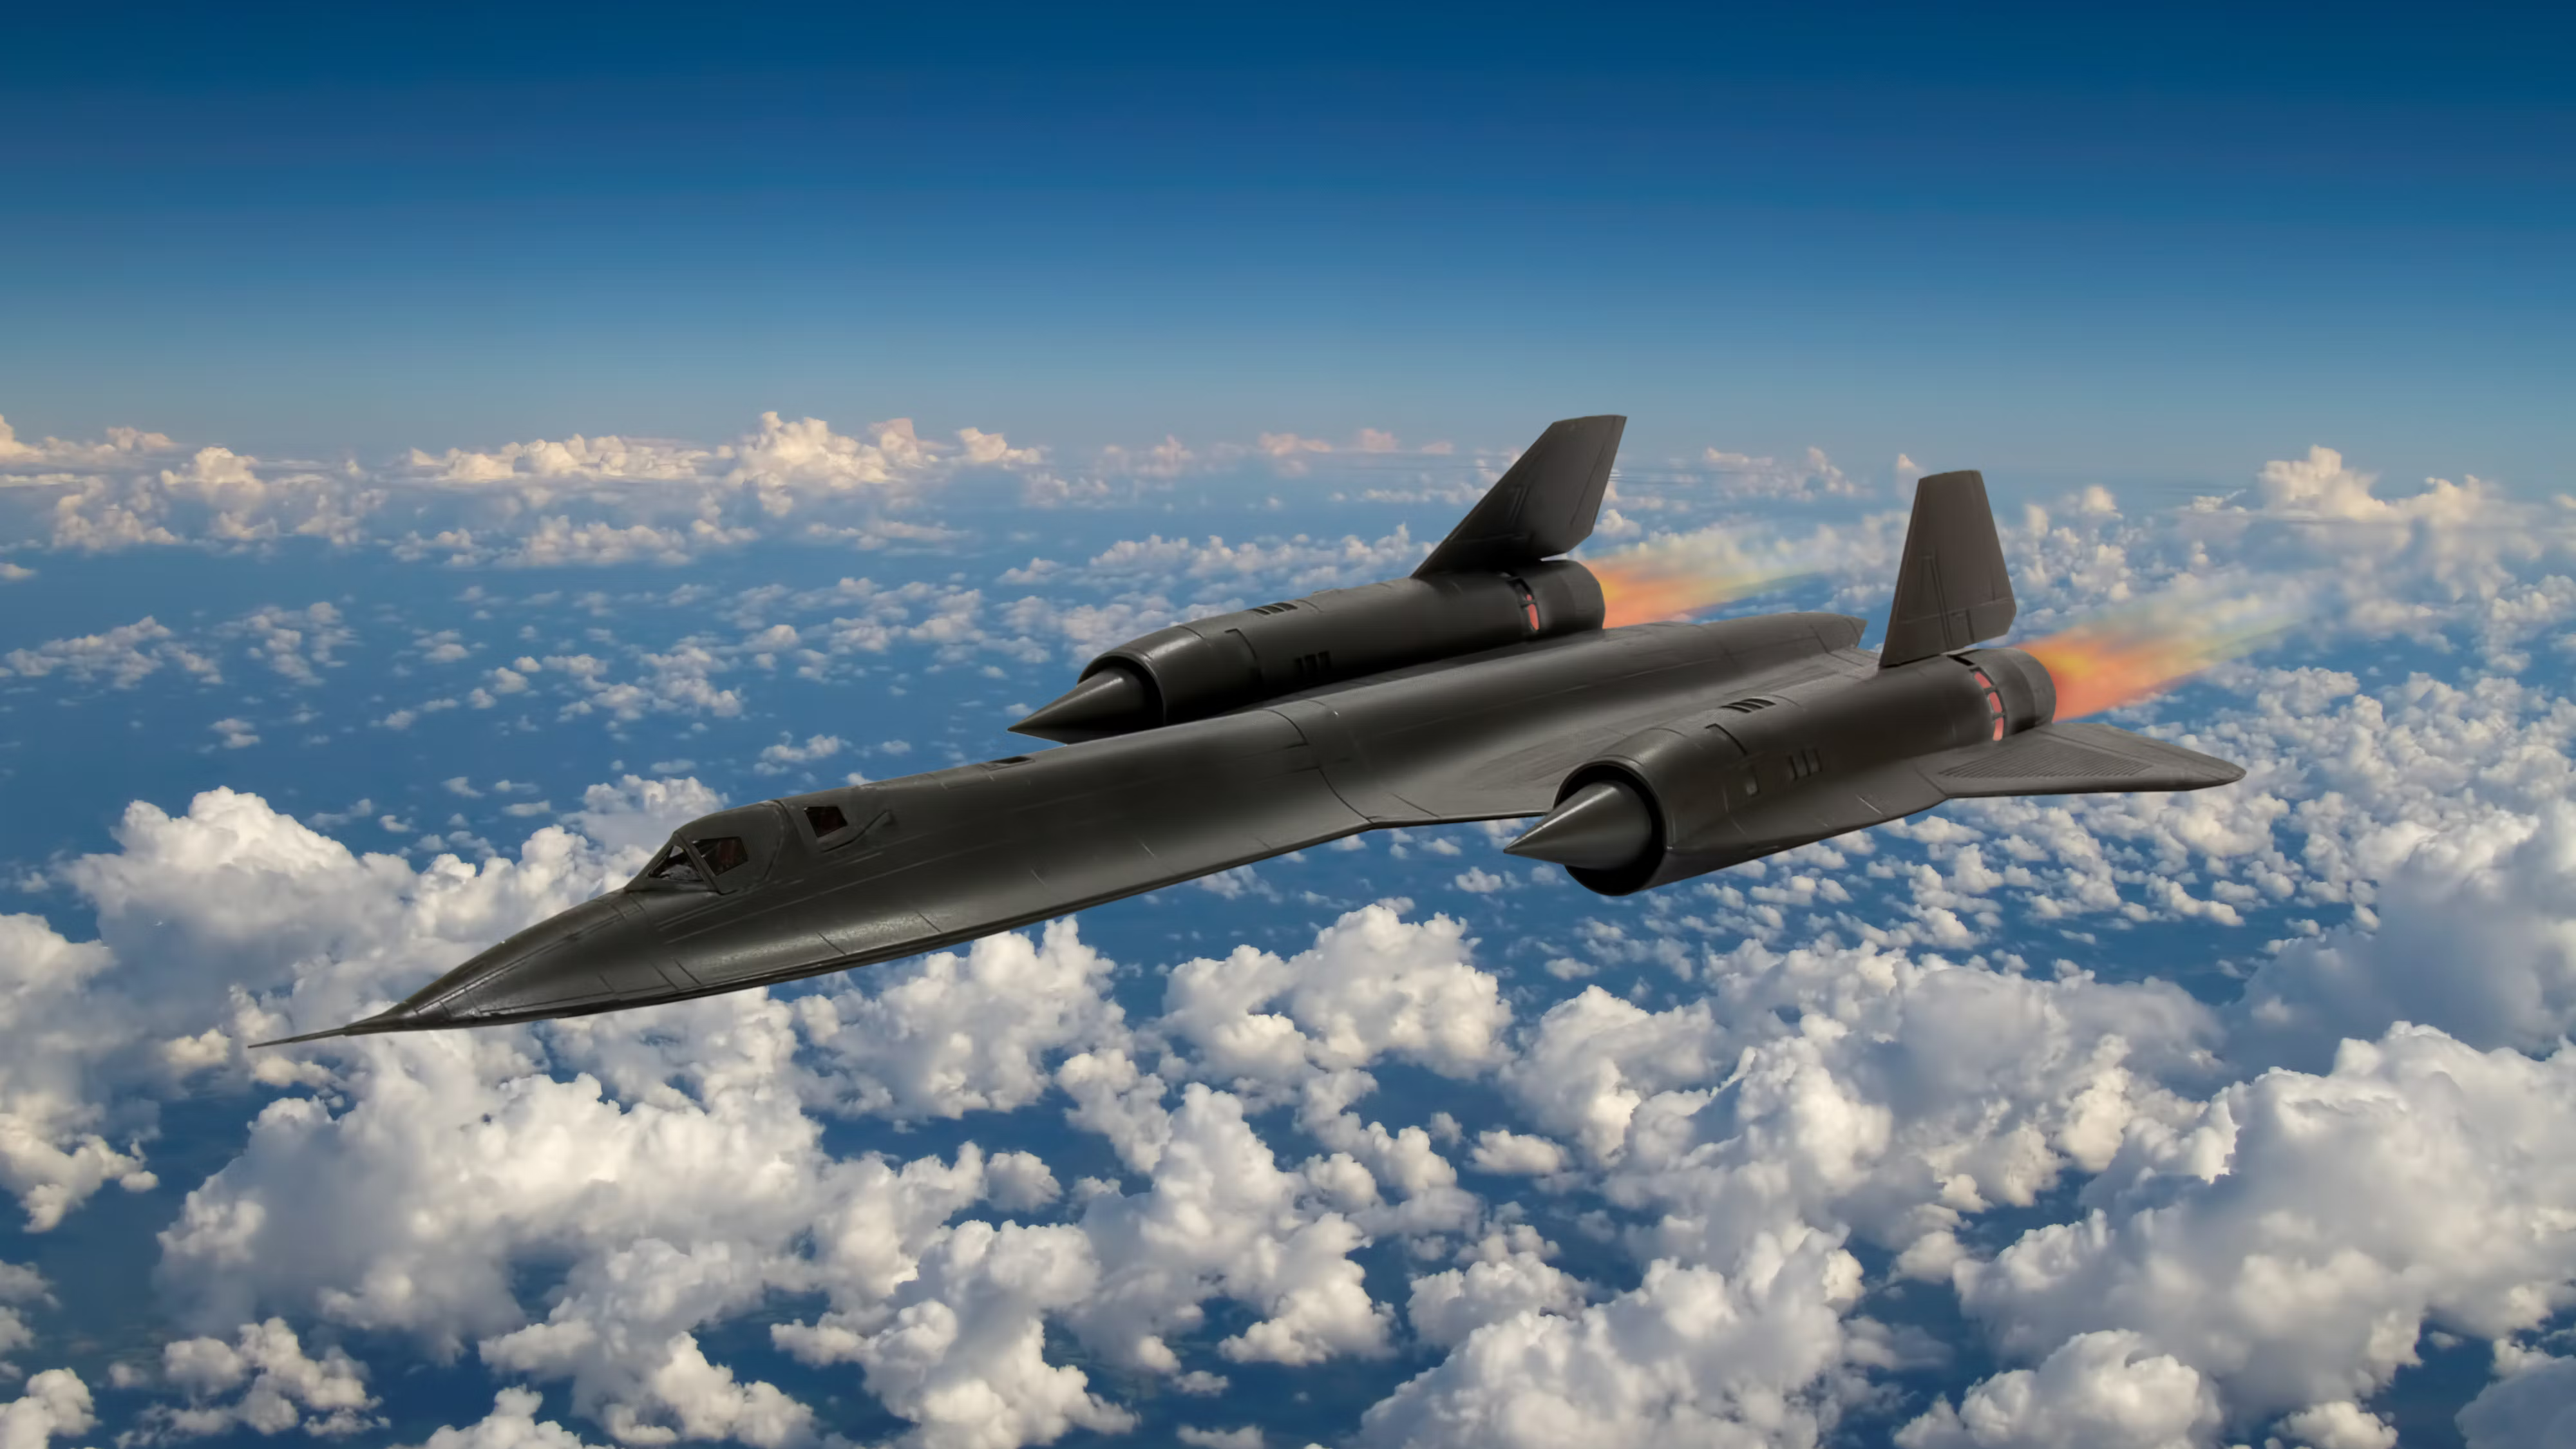 5 Incredible Facts About The Lockheed SR-71 Blackbird